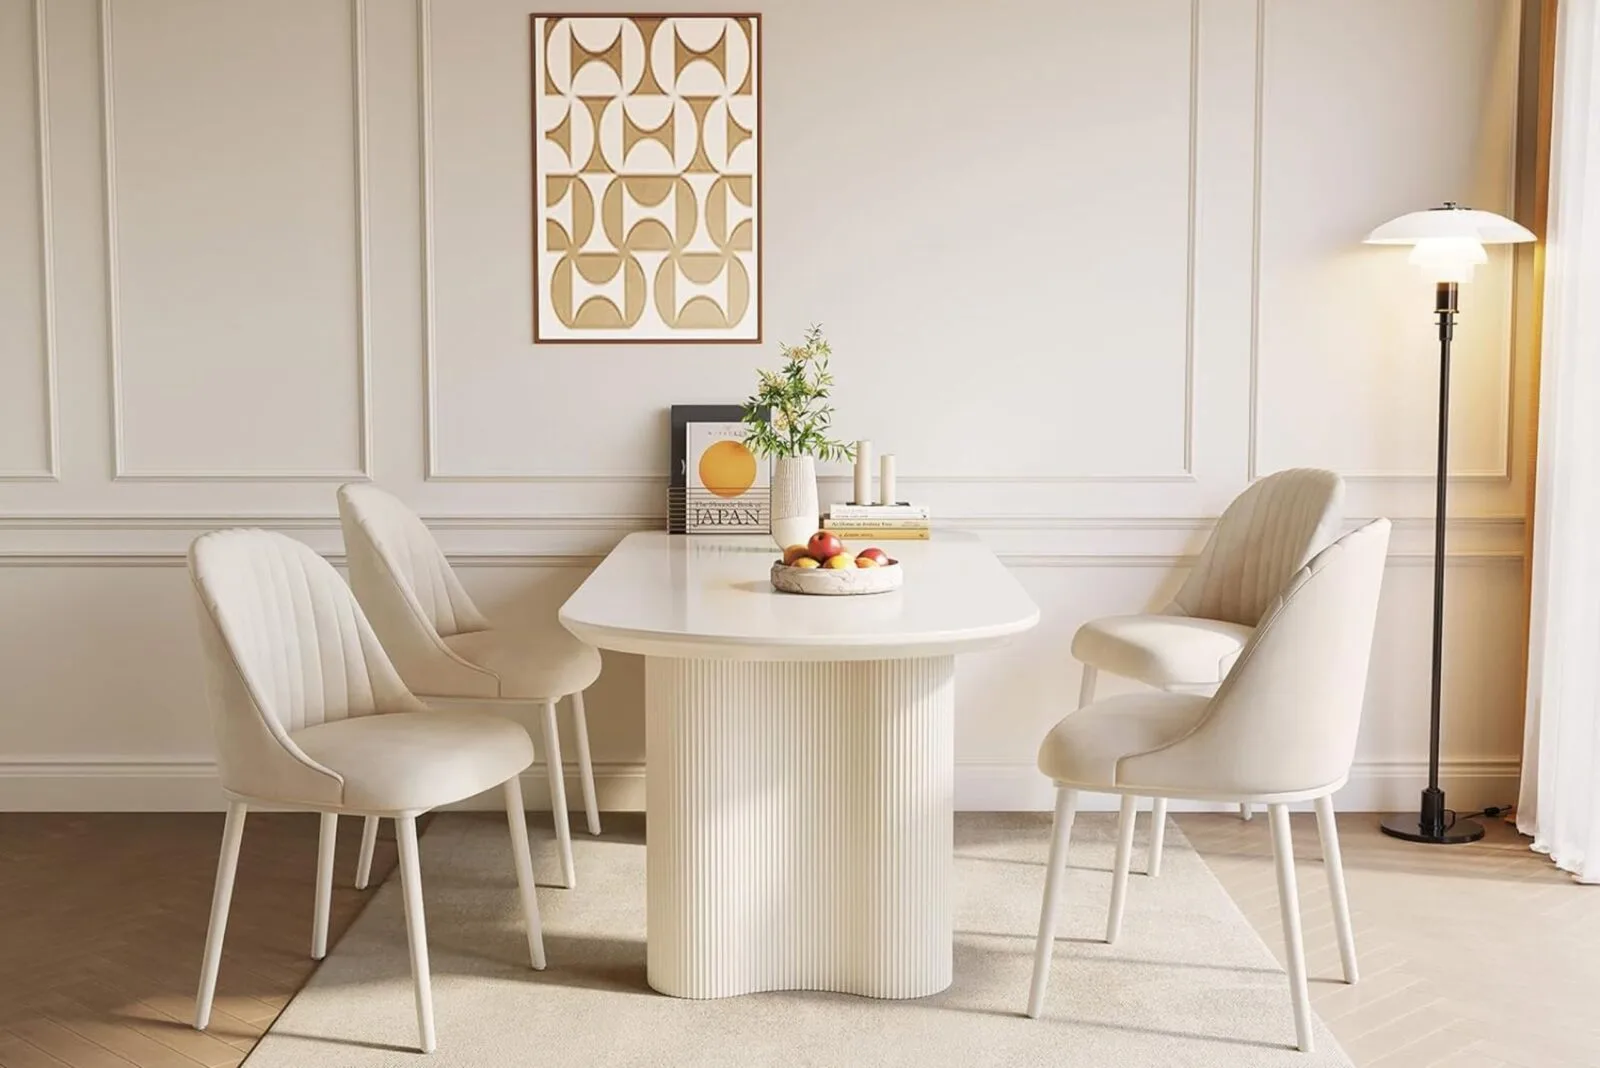 15 Dining Room Decor Ideas to Refresh Your Gathering Space